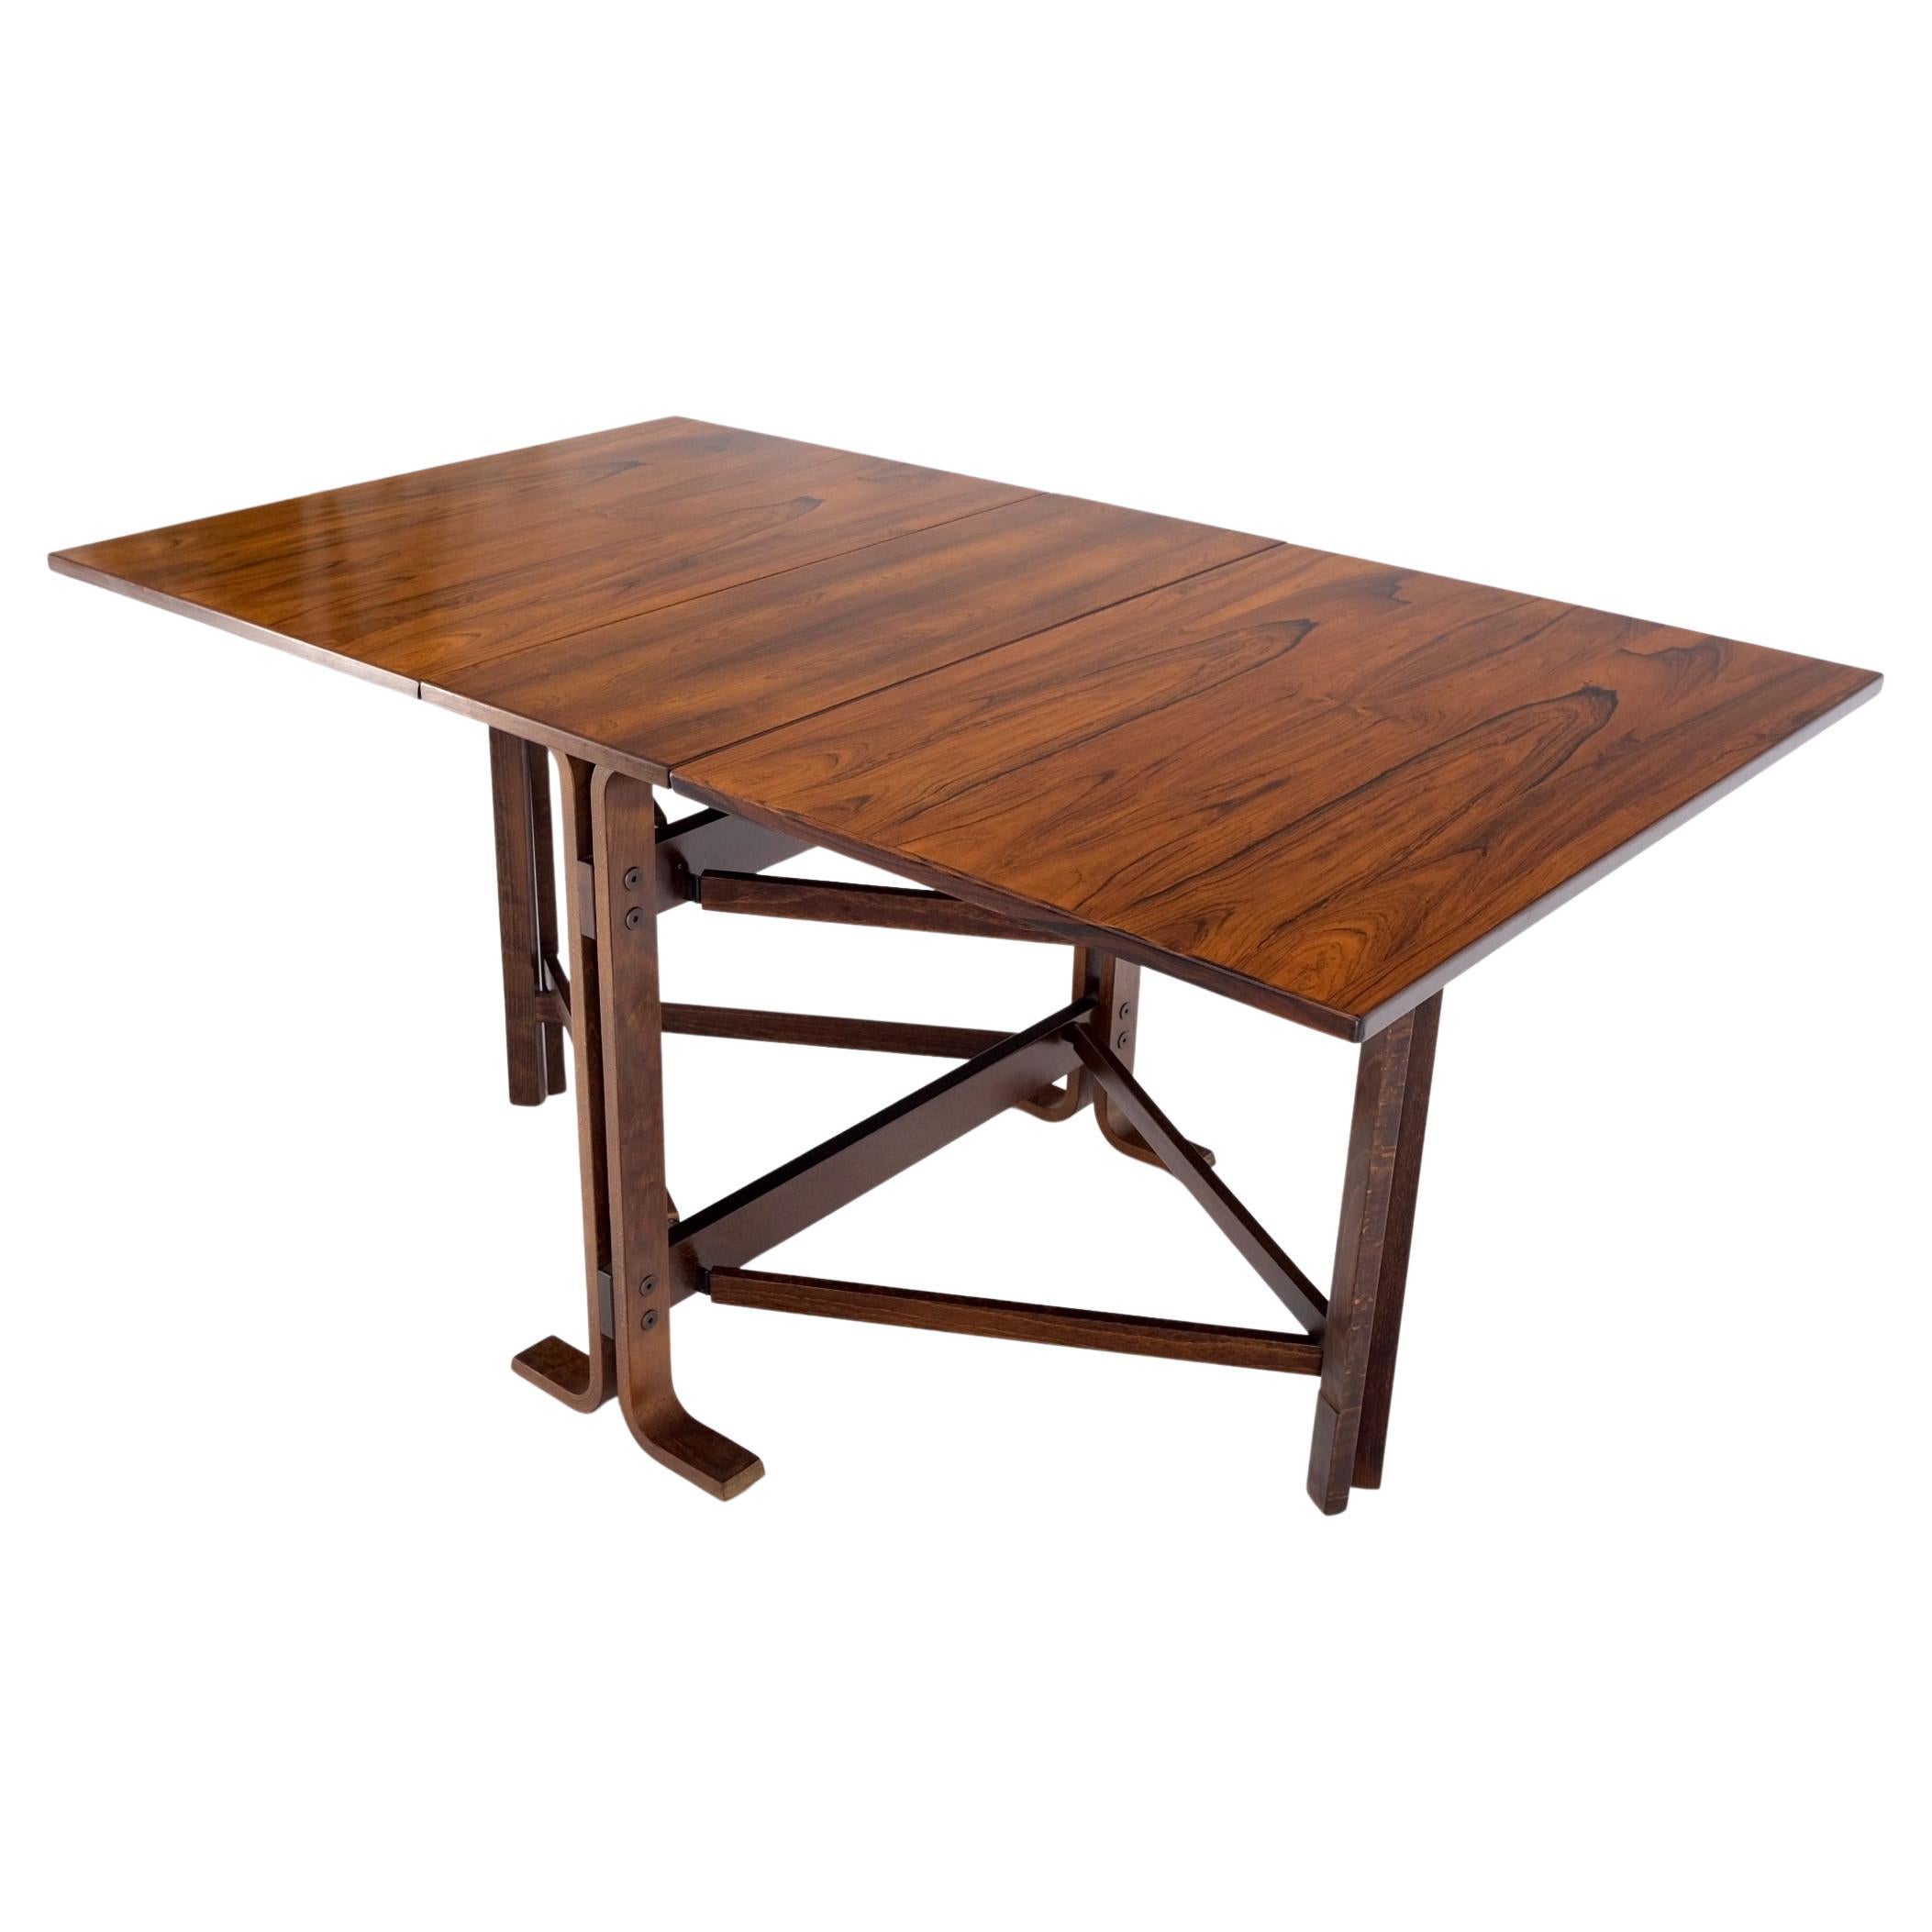 Made in Norway Danish Modern Bent Rosewood Plywood Legs Drop Leaf Dining Table For Sale